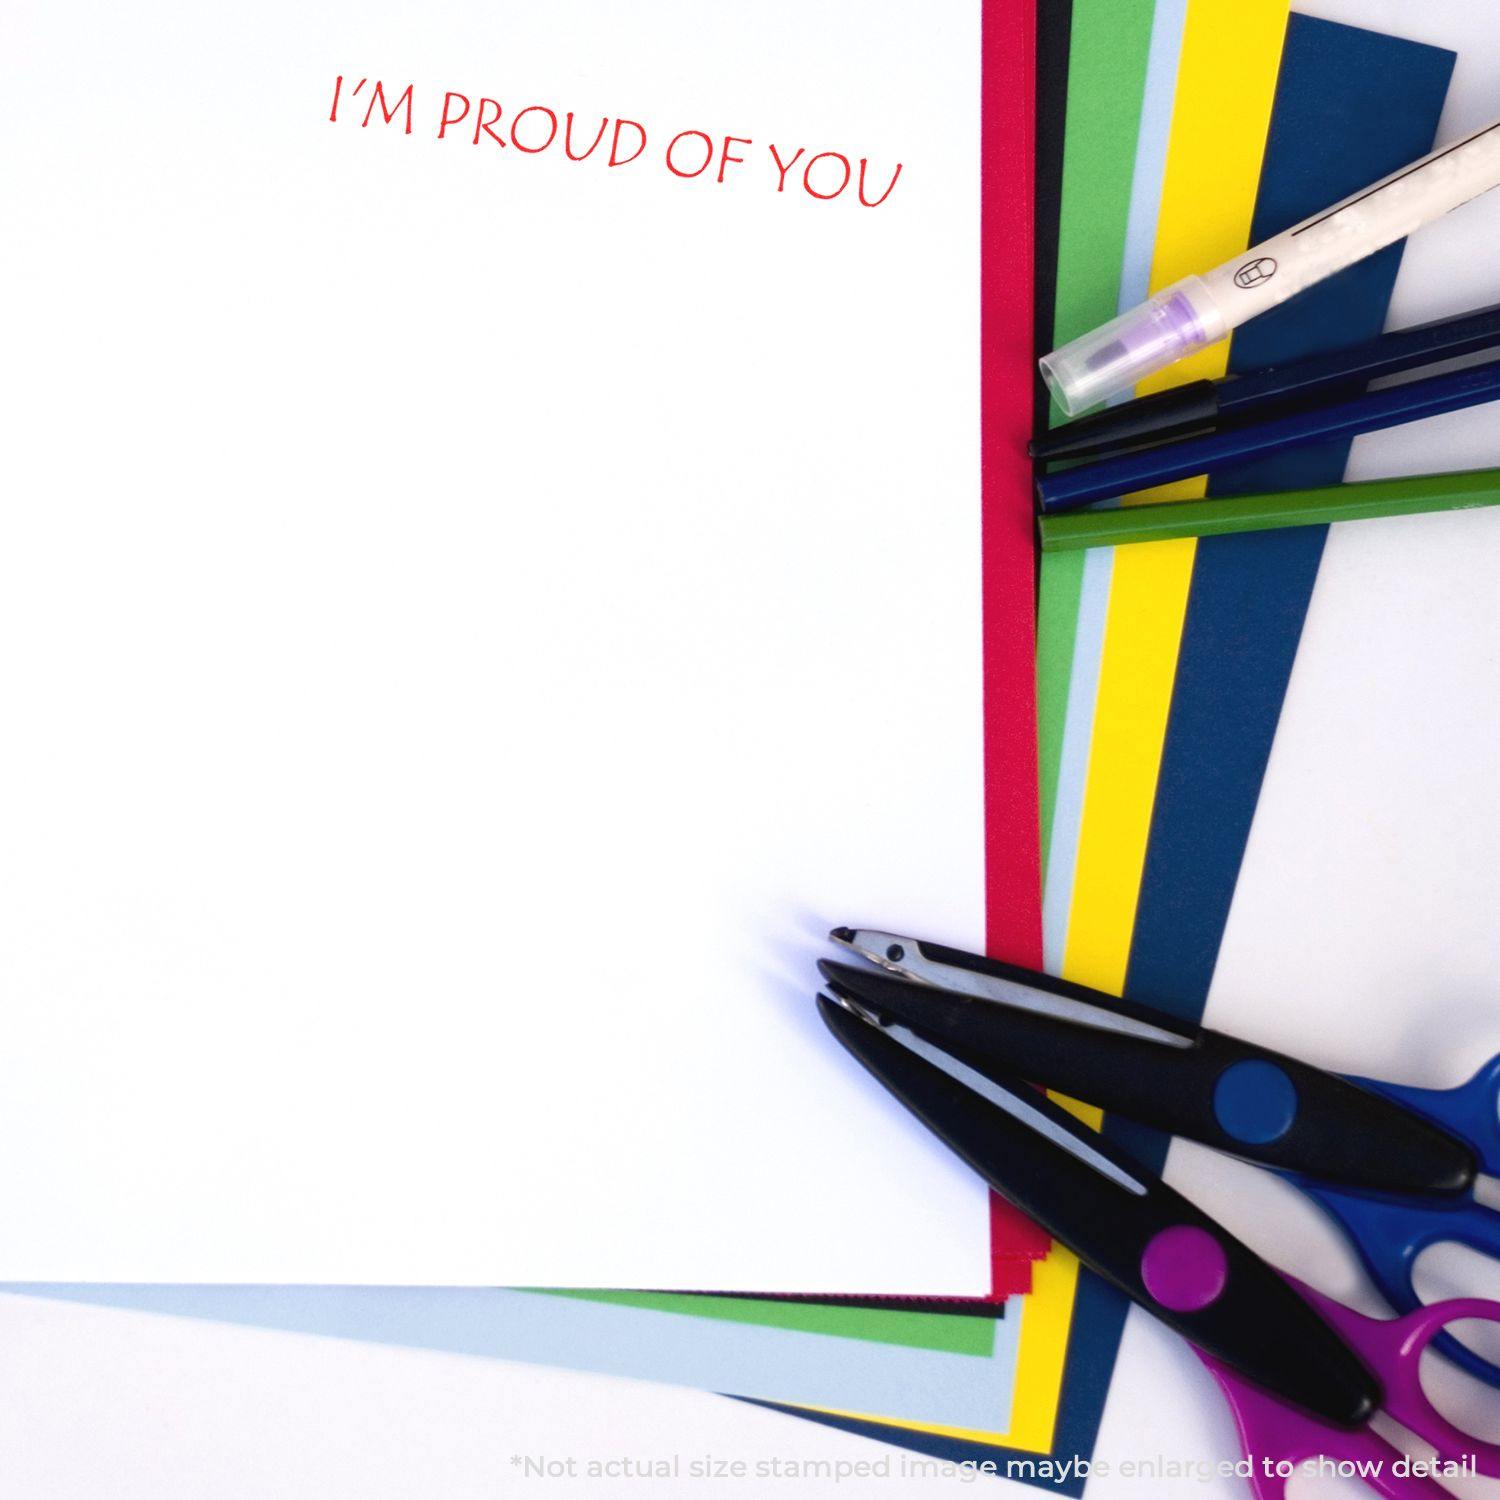 A self-inking stamp with a stamped image showing how the text "I'M PROUD OF YOU" in a large font is displayed by it.